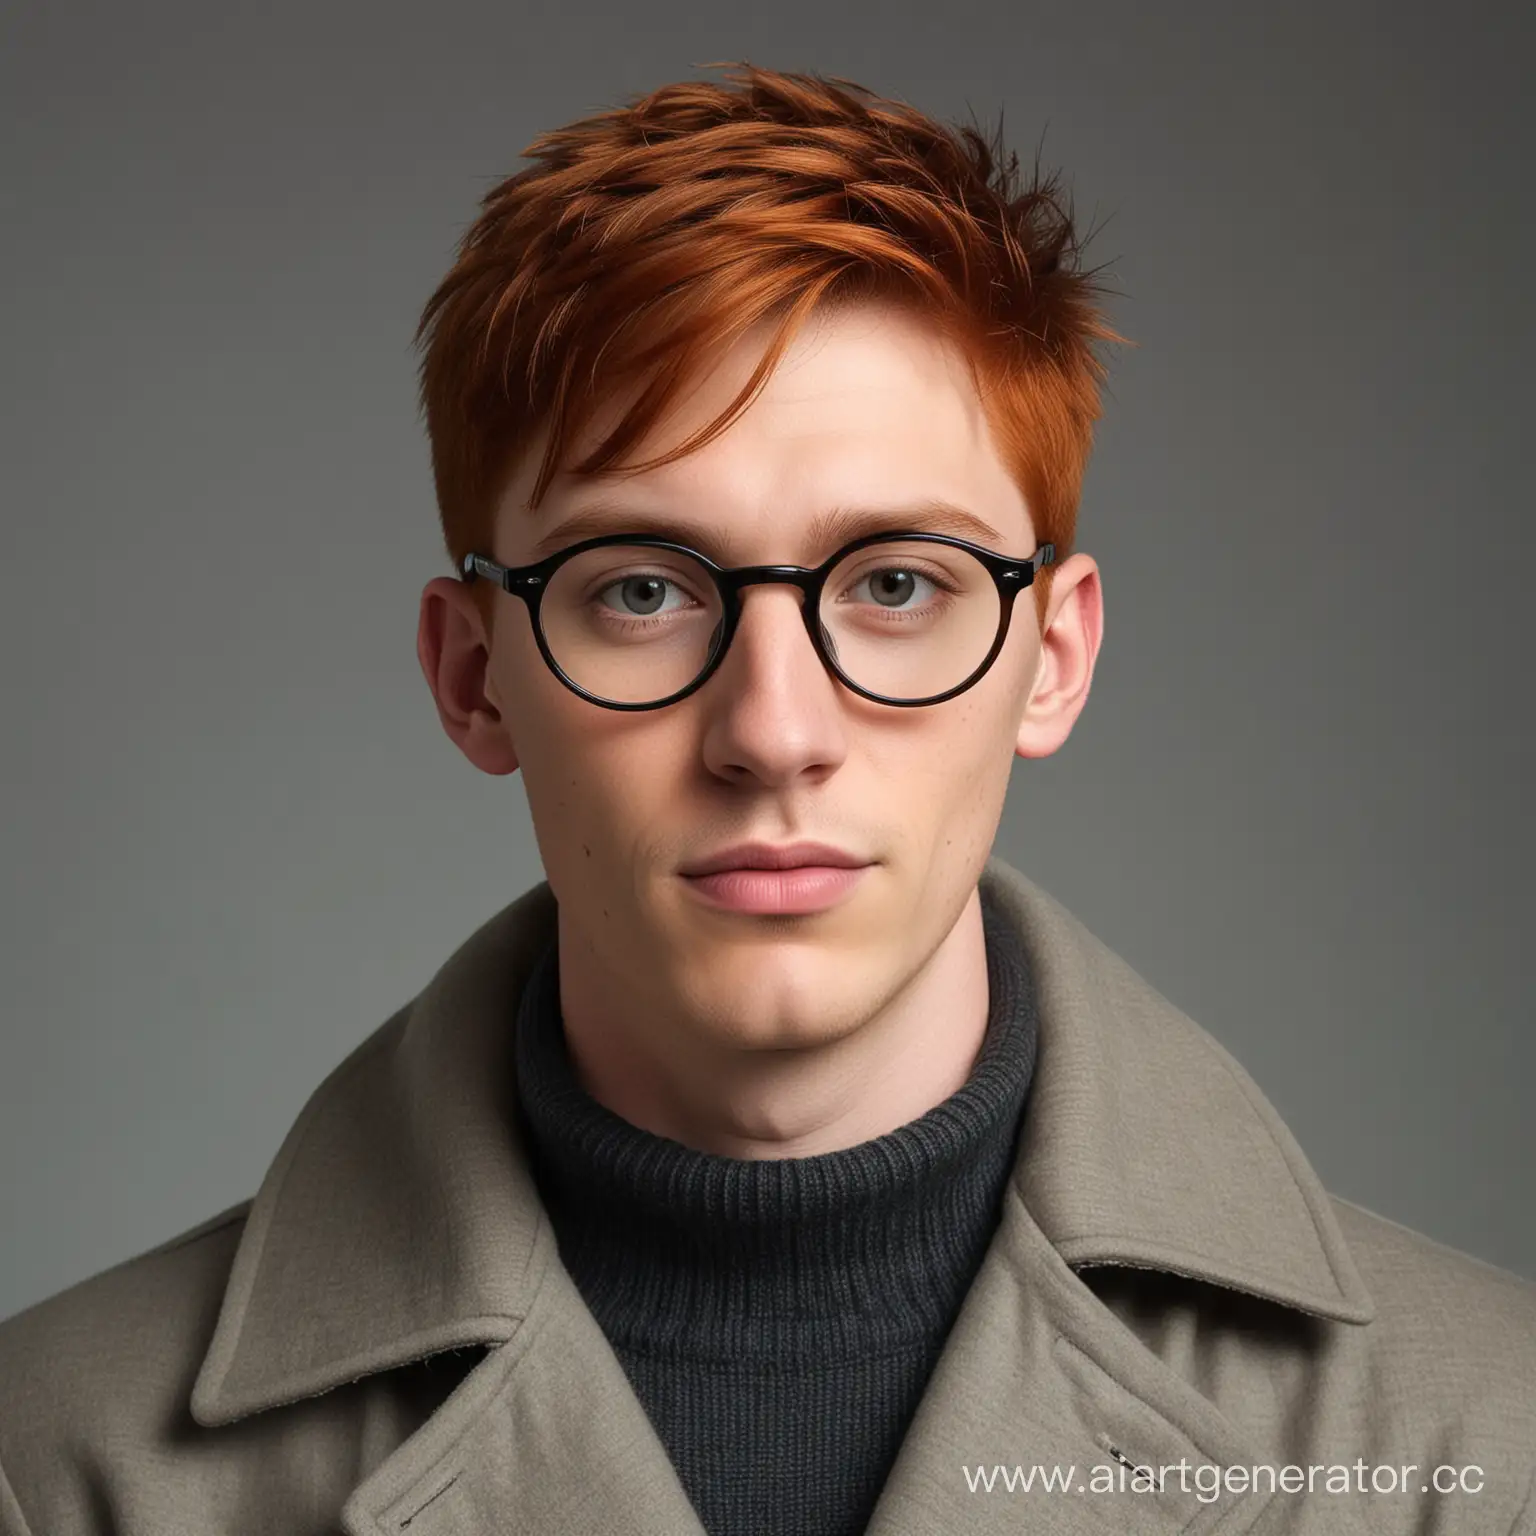 Stylish-RedHaired-Man-in-Black-Glasses-and-Casual-Outfit